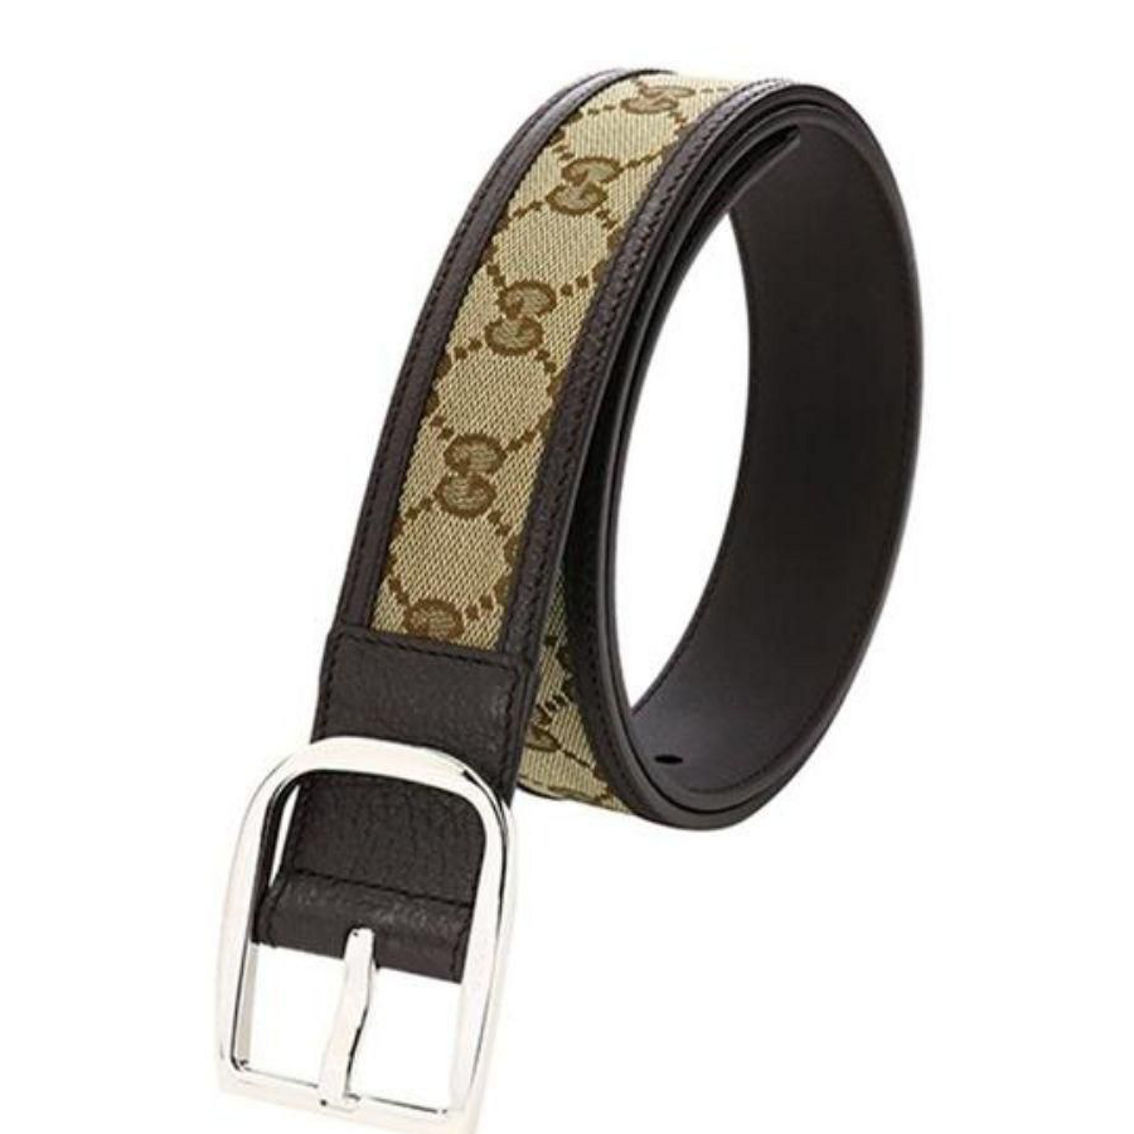 Gucci GG Brown and Beige Canvas Leather Trim Belt Size 36/90 - Image 4 of 5